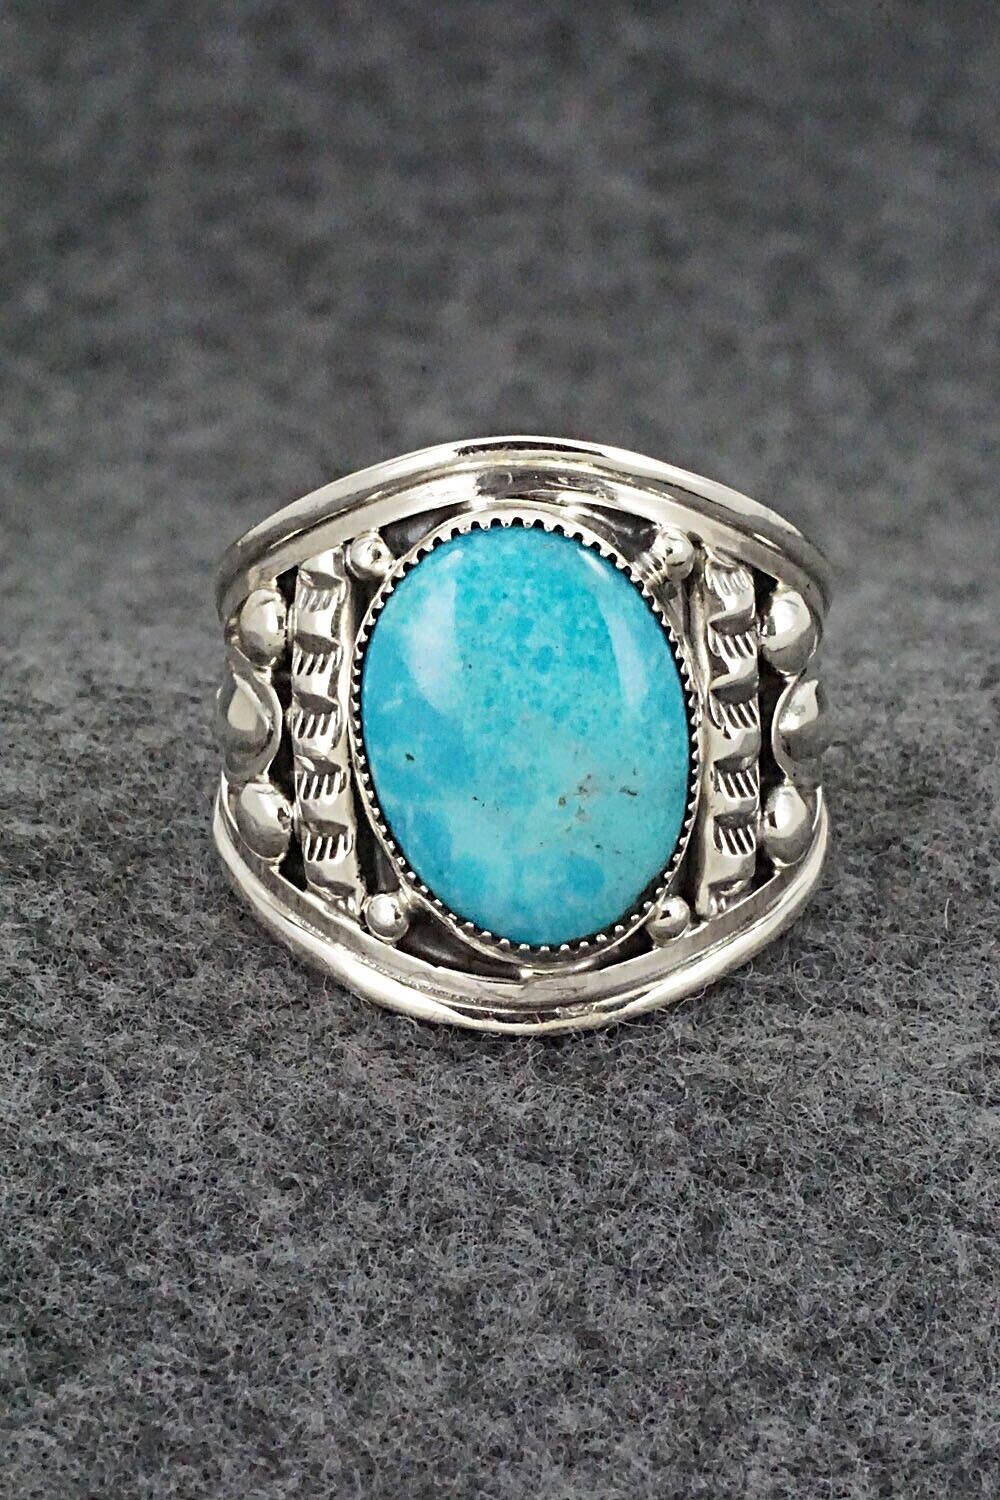 Turquoise and Sterling Silver Ring - Larson Lee - Size 12